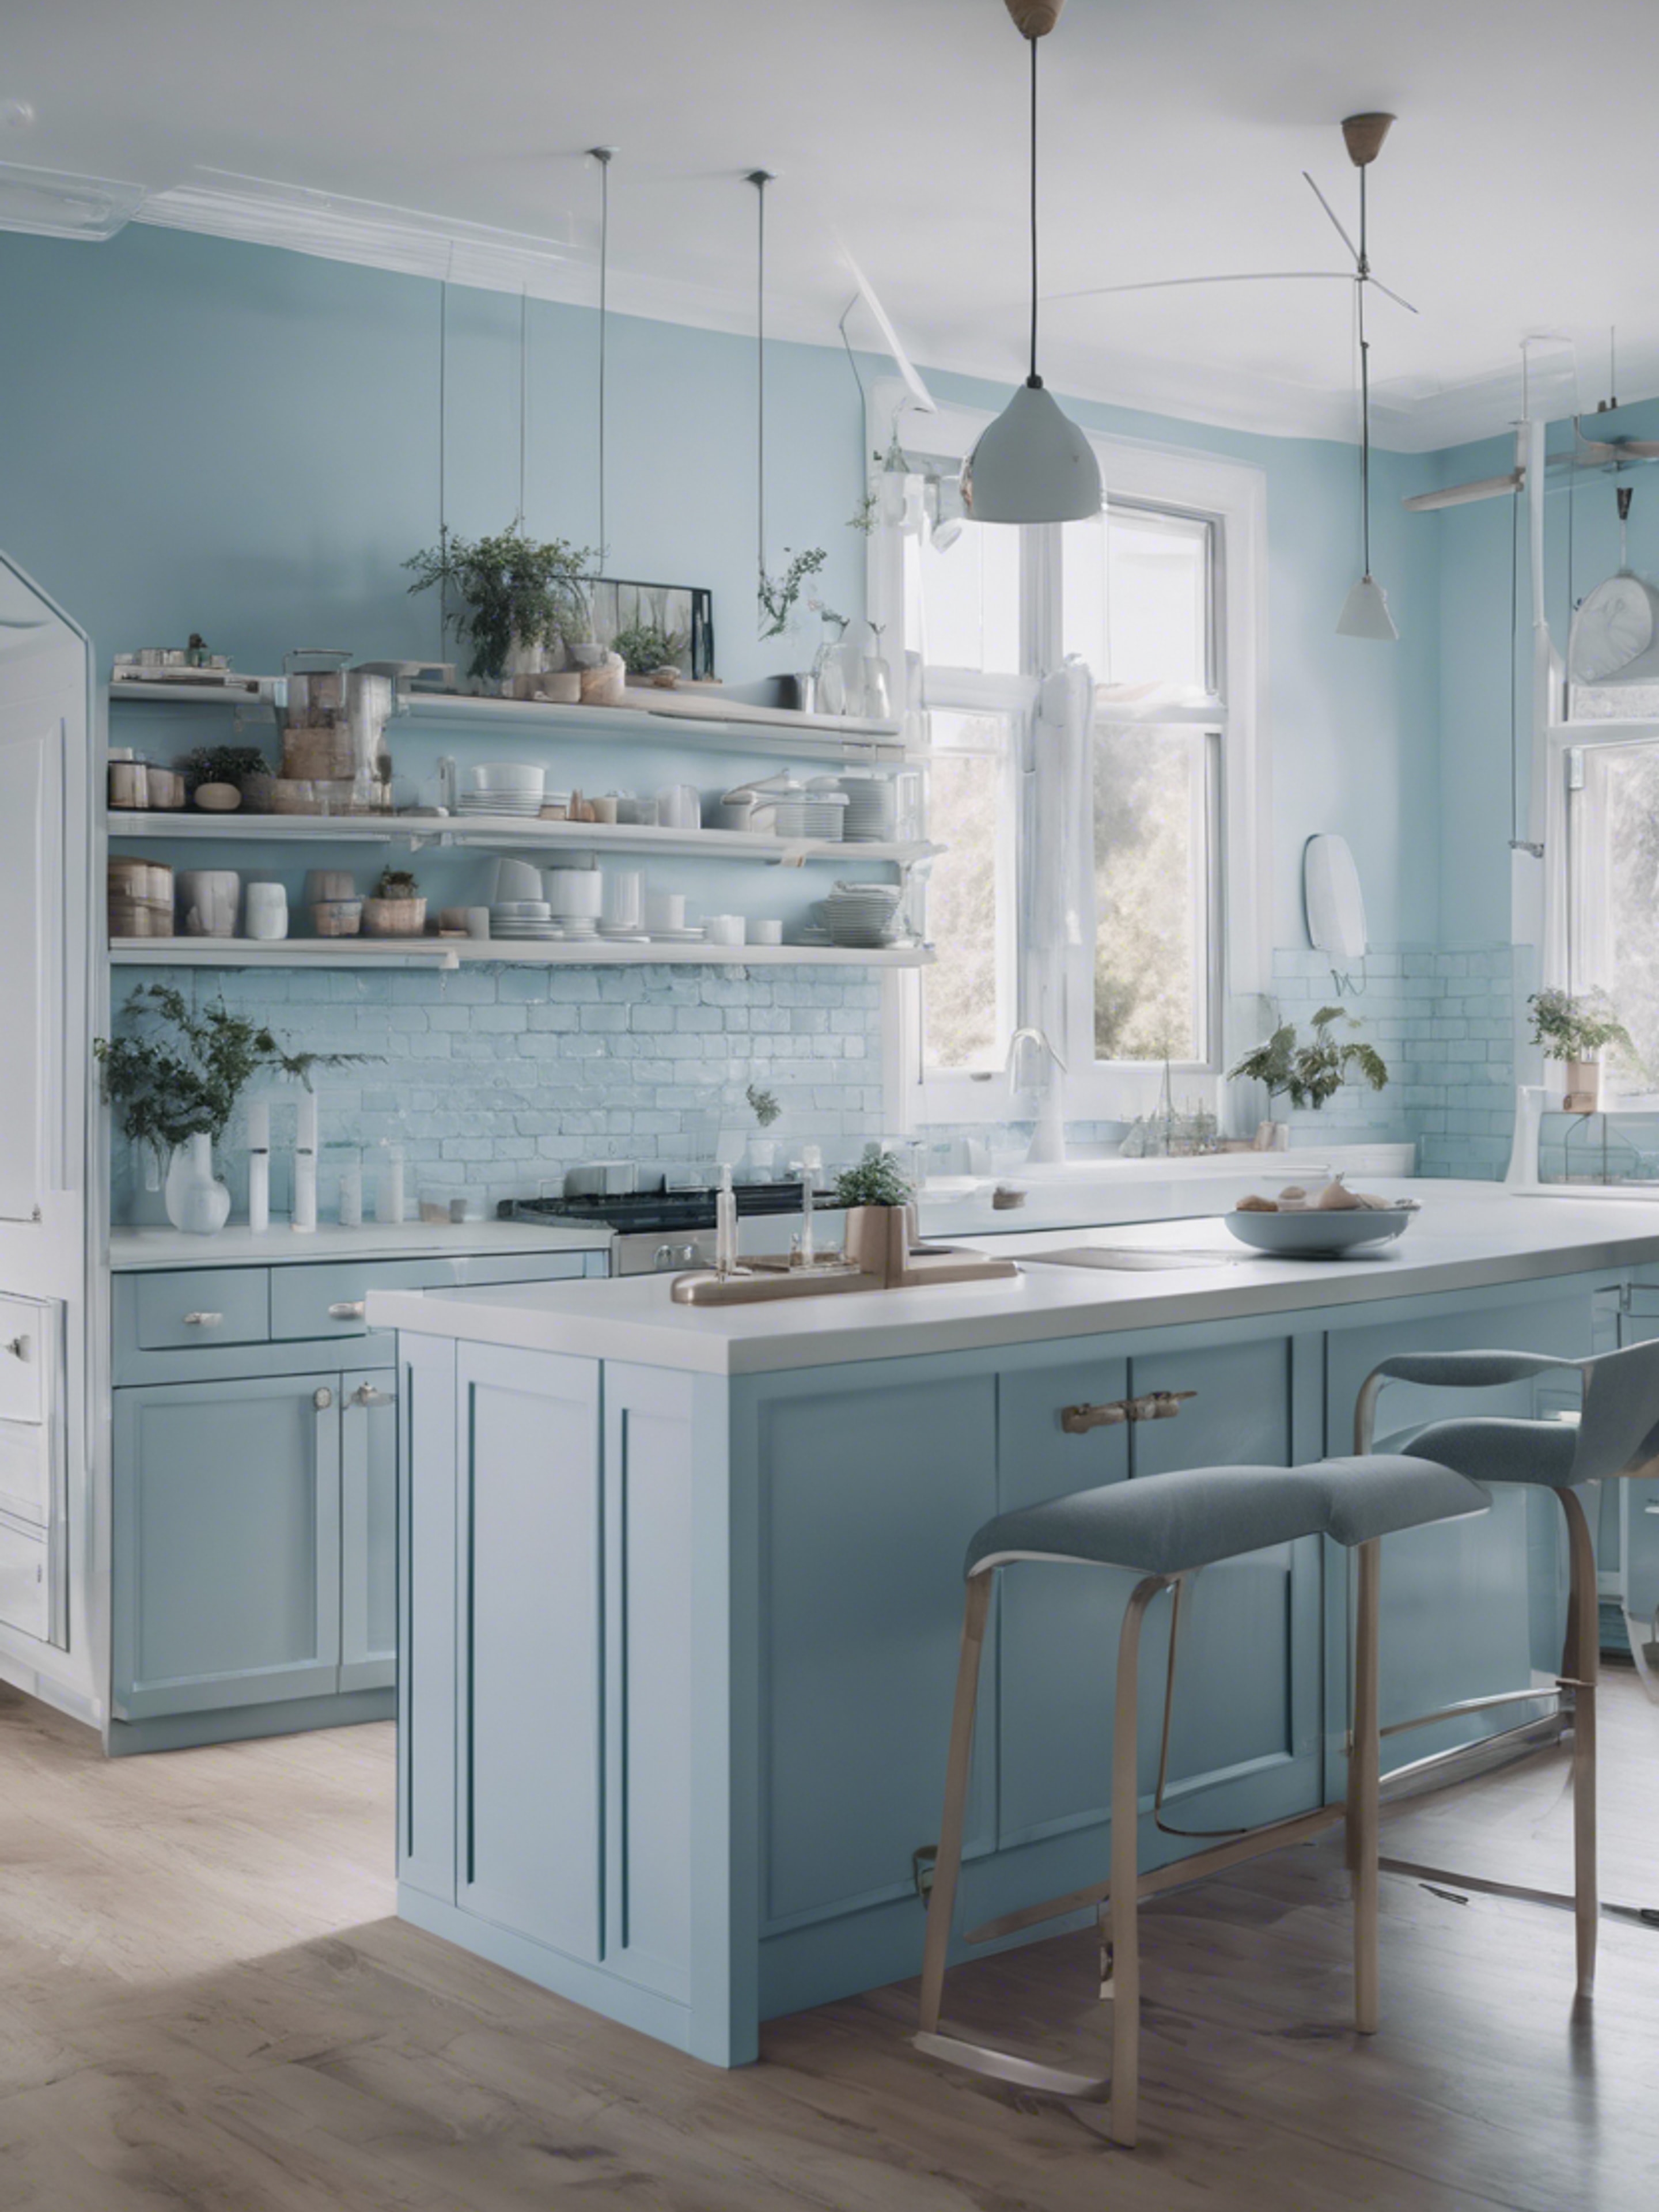 An open concept kitchen with pastel blue decor and modern, chic styling.壁紙[473c0827d42a49cfa964]